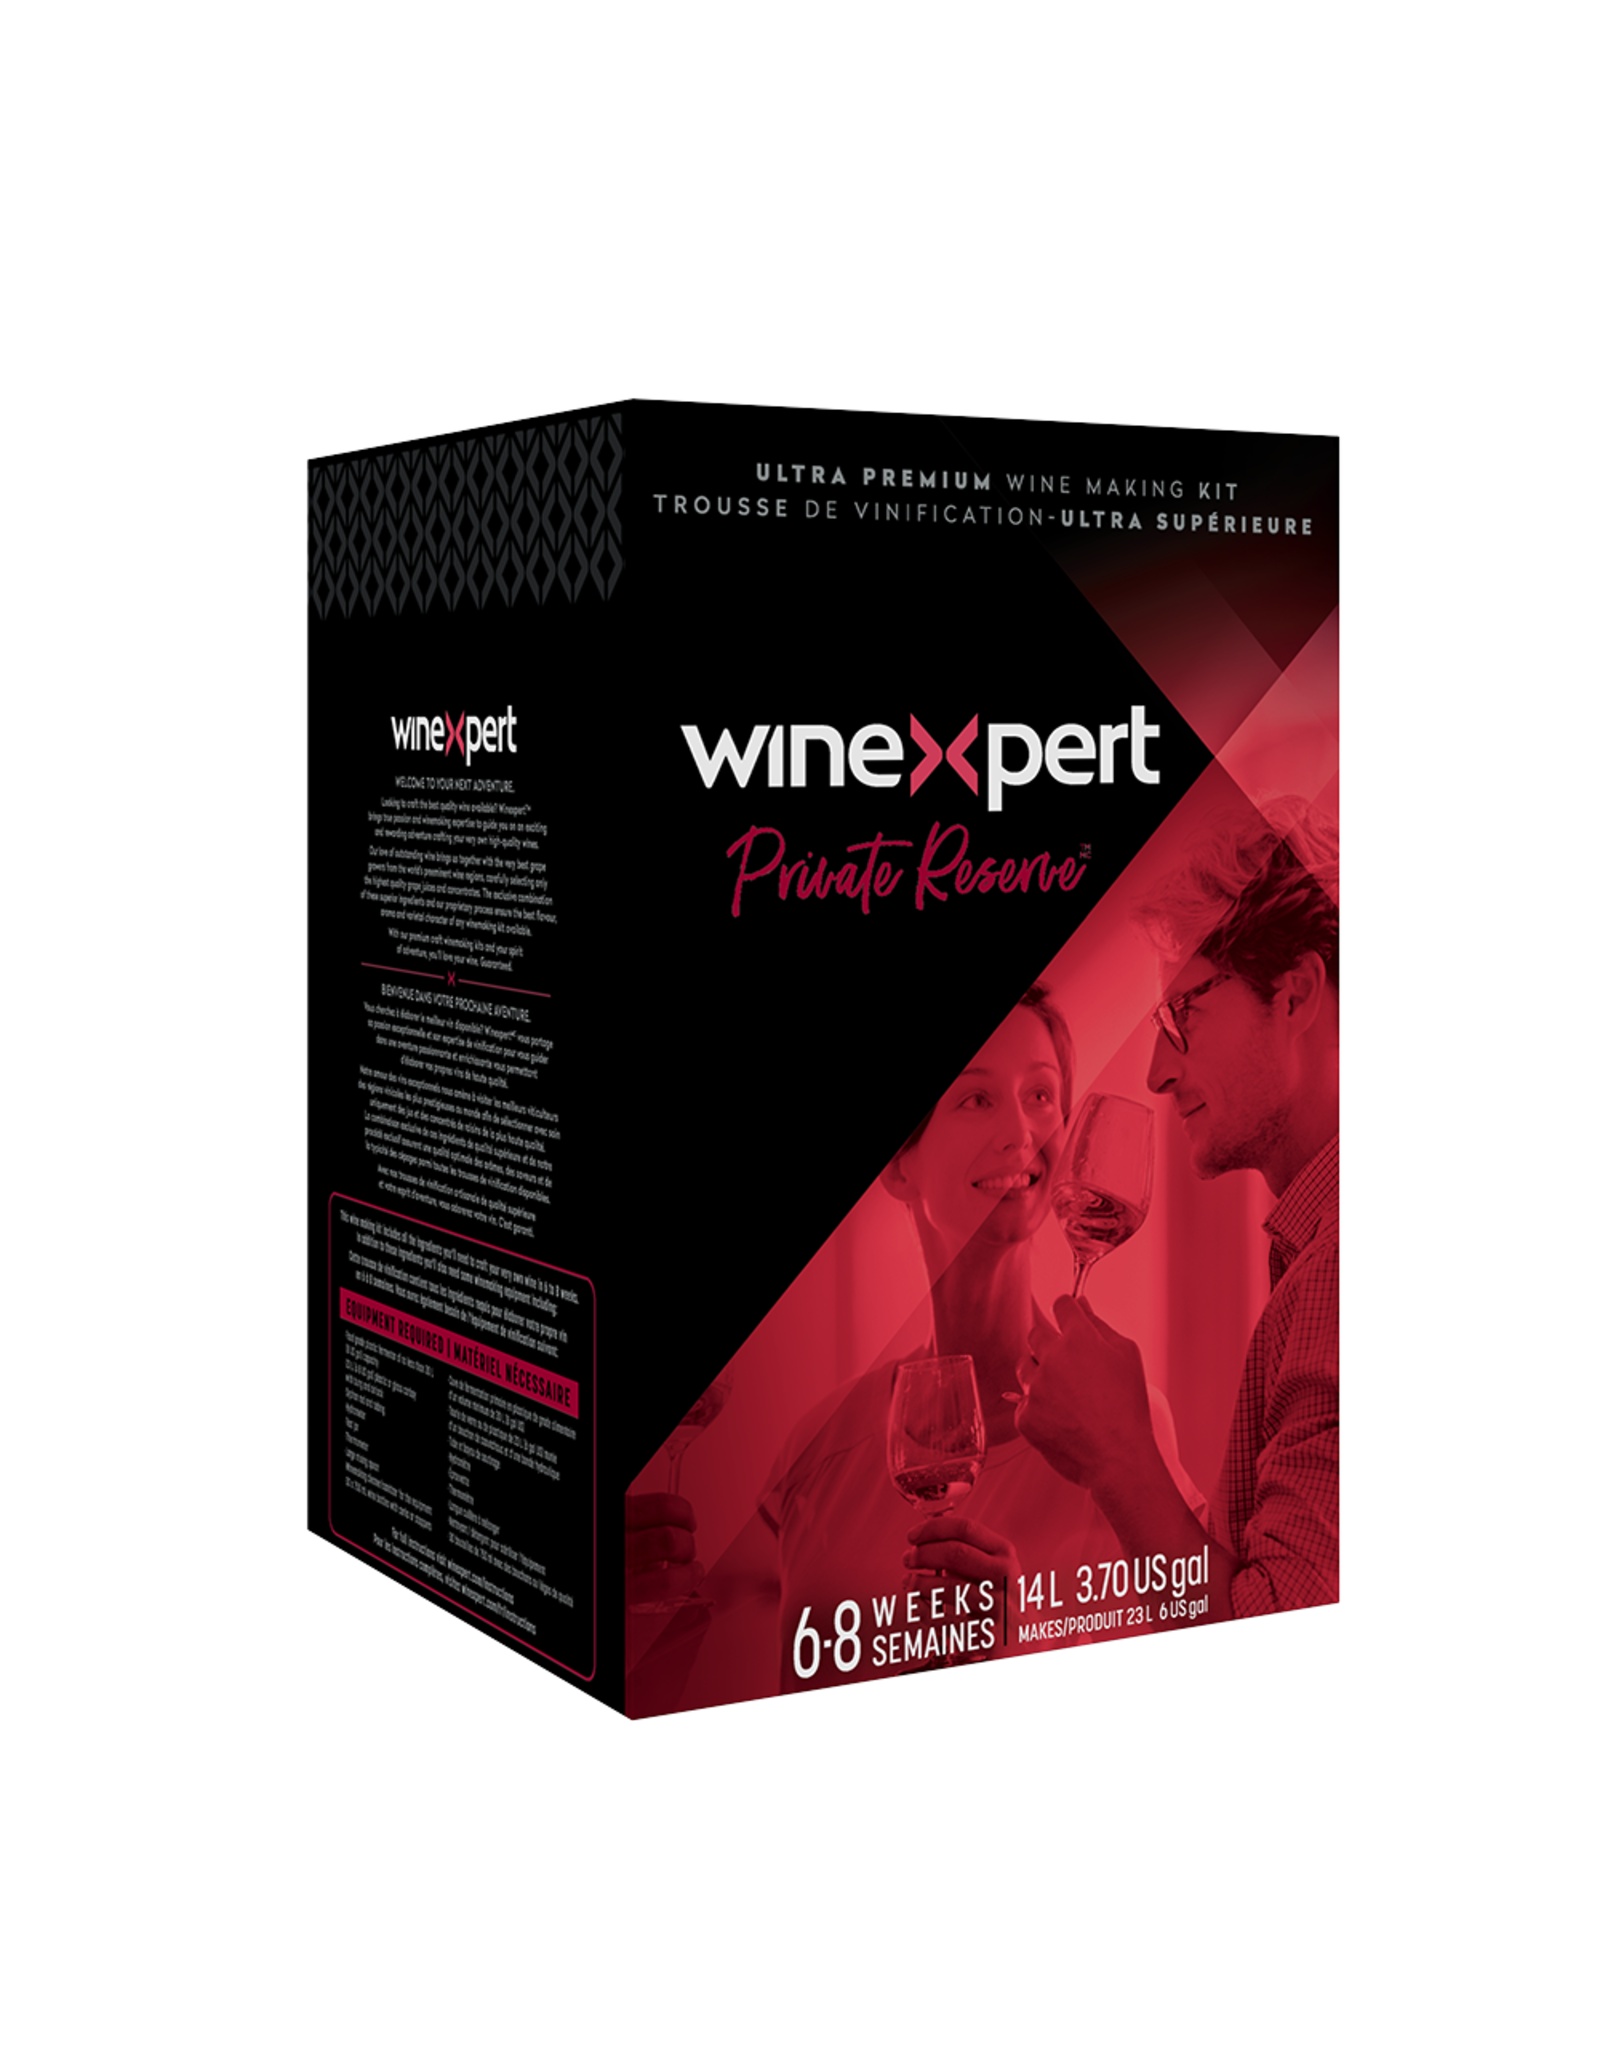 Winexpert Private Reserve - Pinot gris